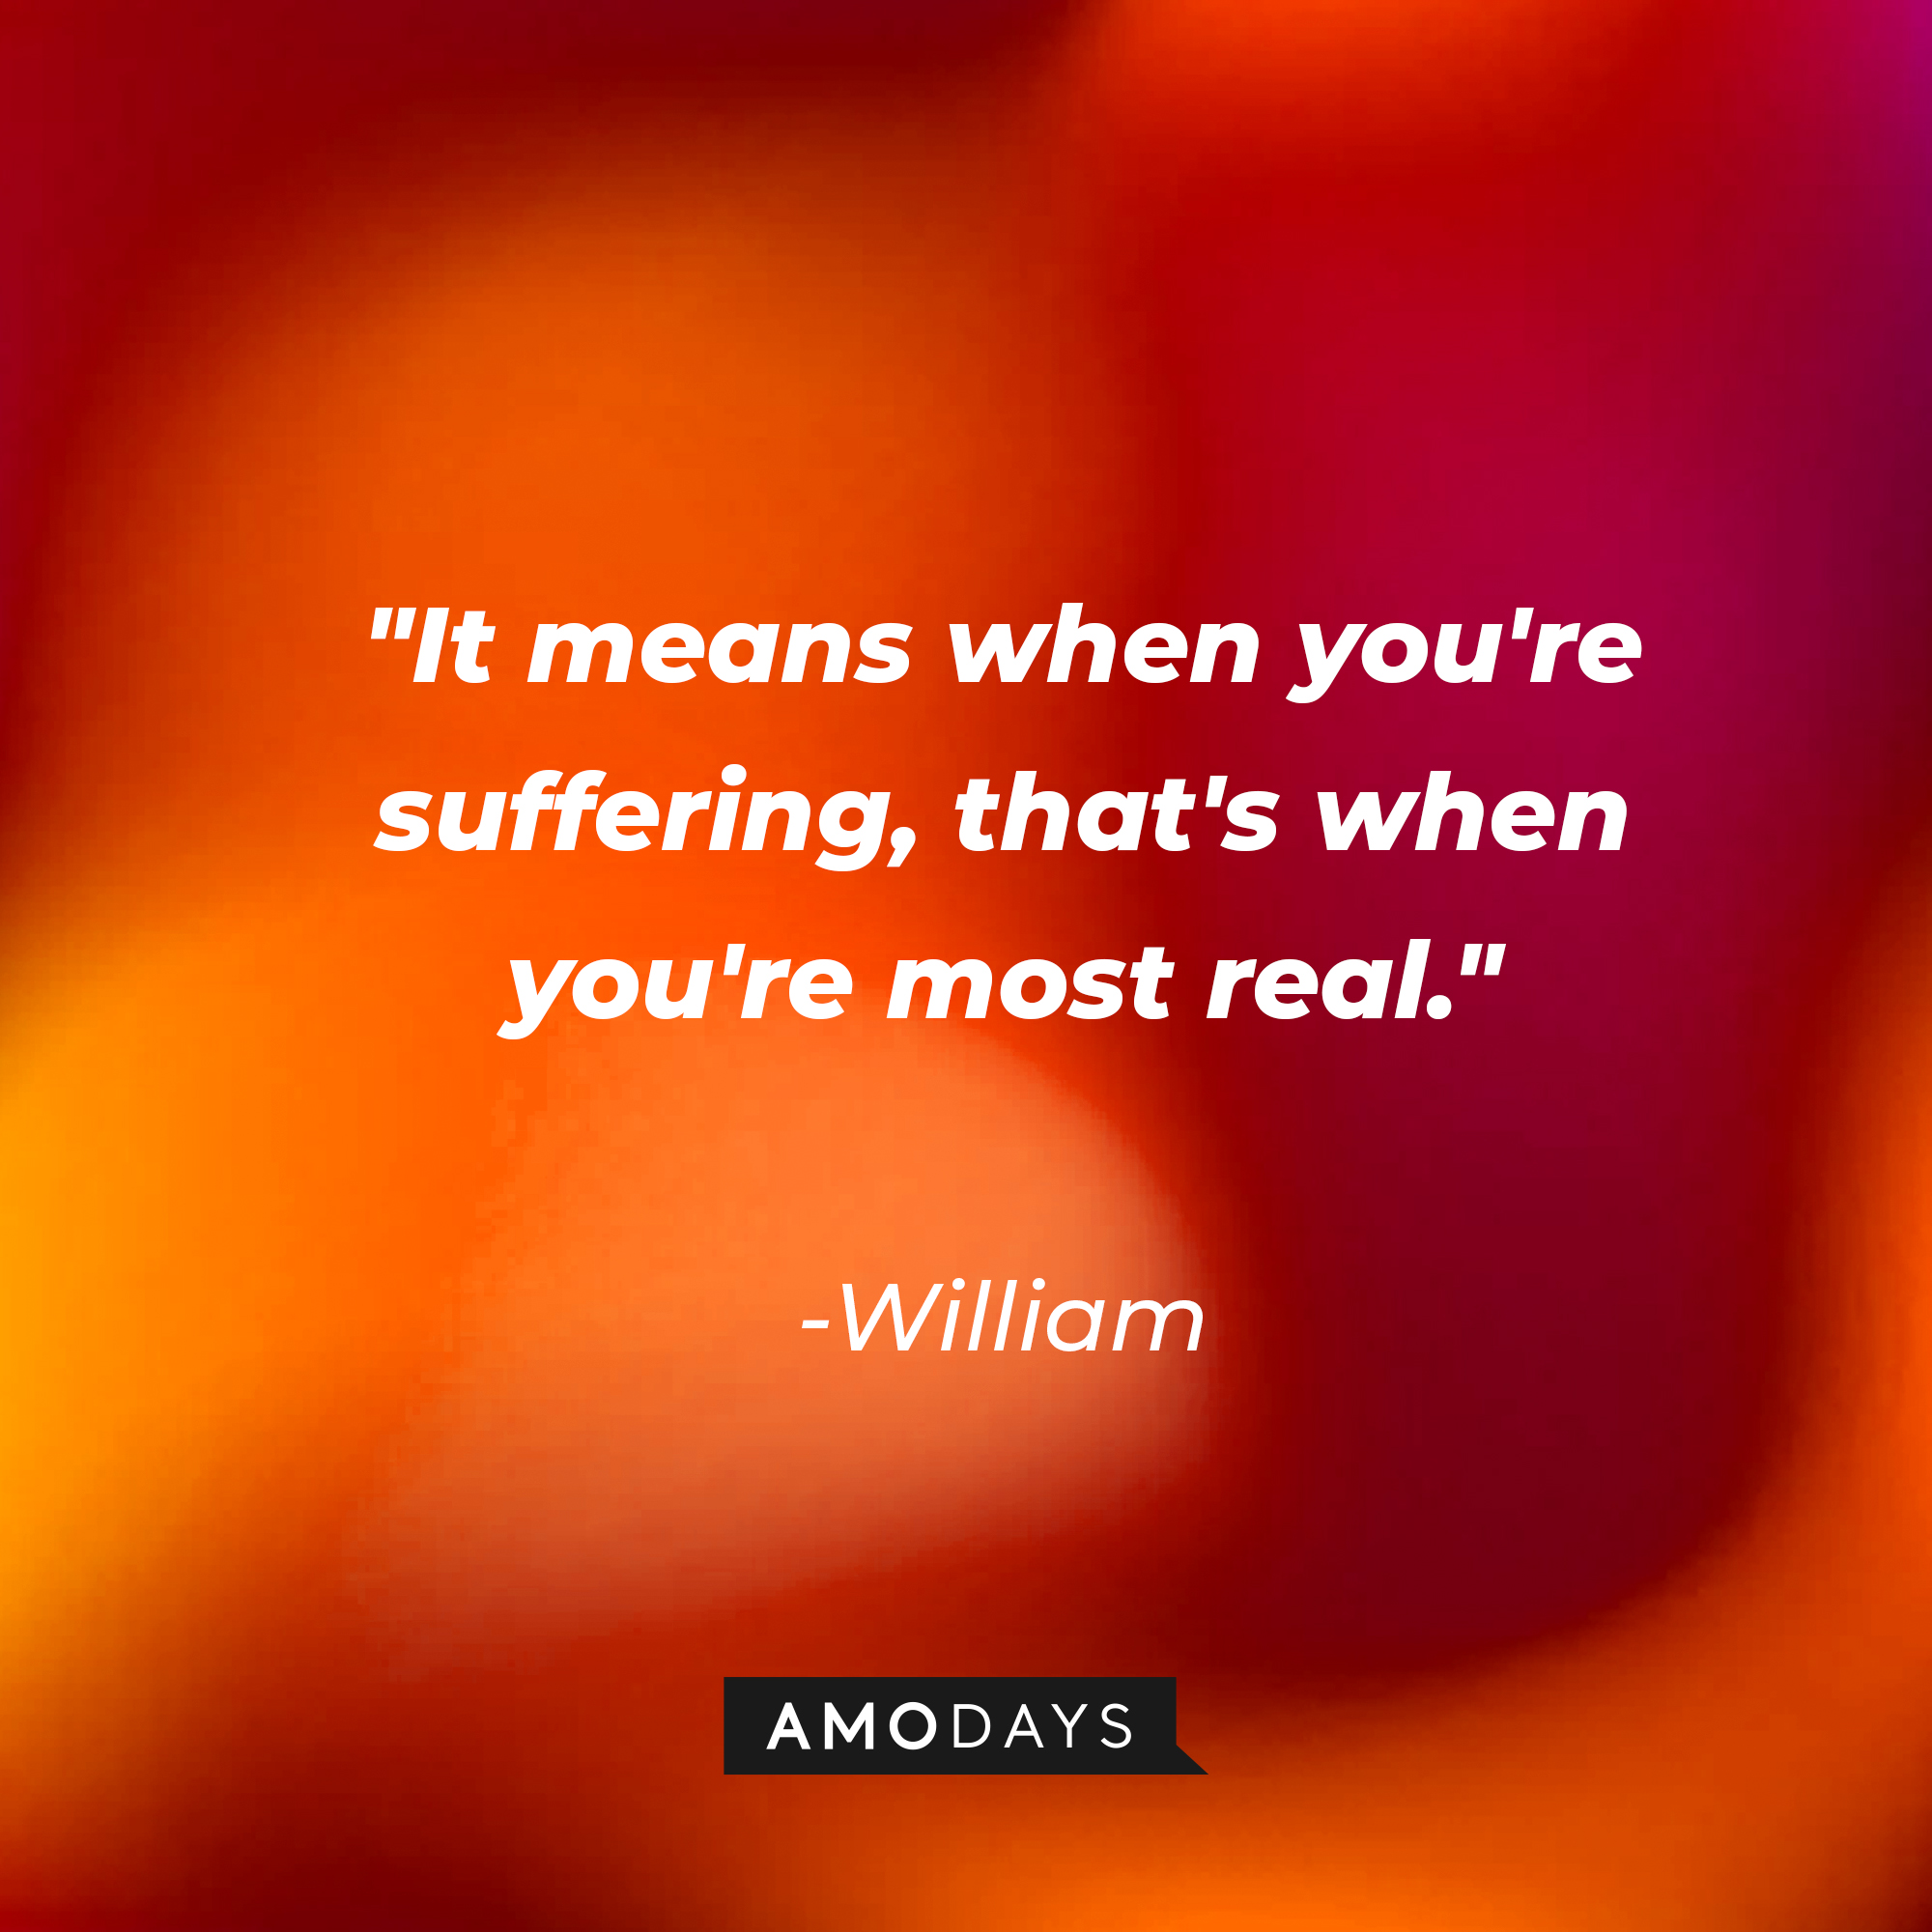 William's quote: "It means when you're suffering, that's when you're most real." | Source: AmoDays